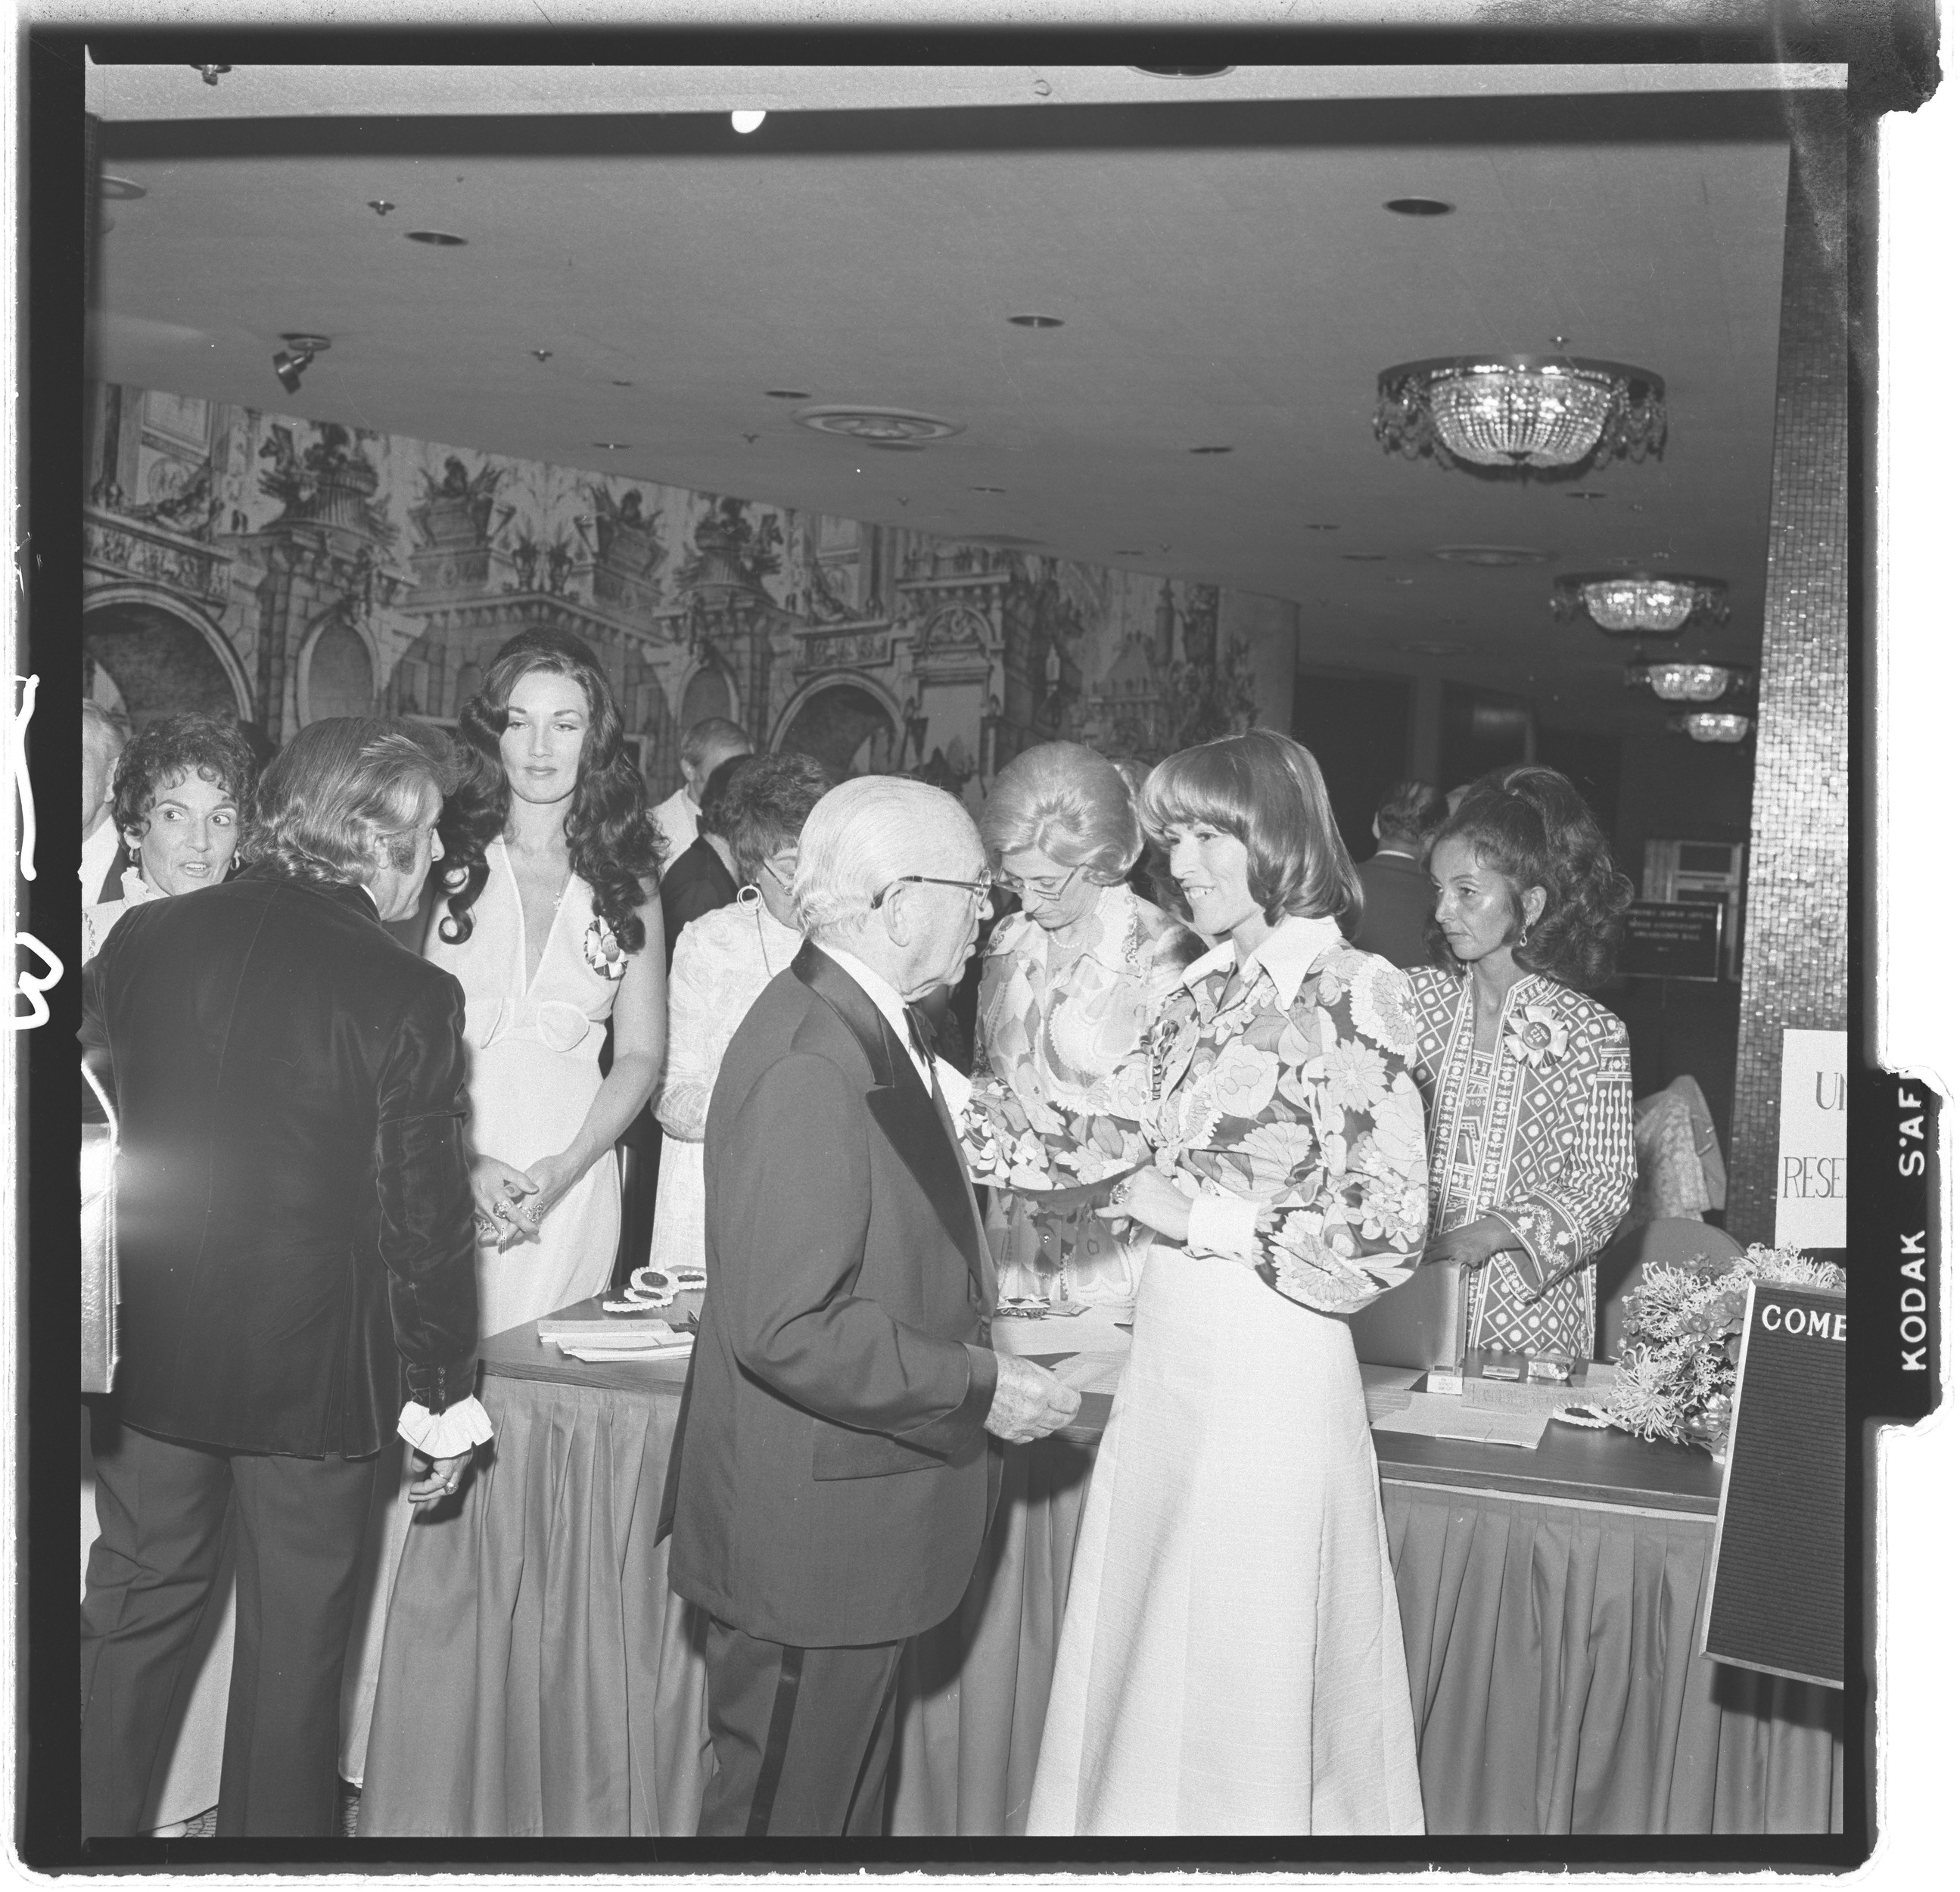 Photographs of Combined Jewish Appeal (Cocktail Party at Caesars Palace, Red Skelton), image 19